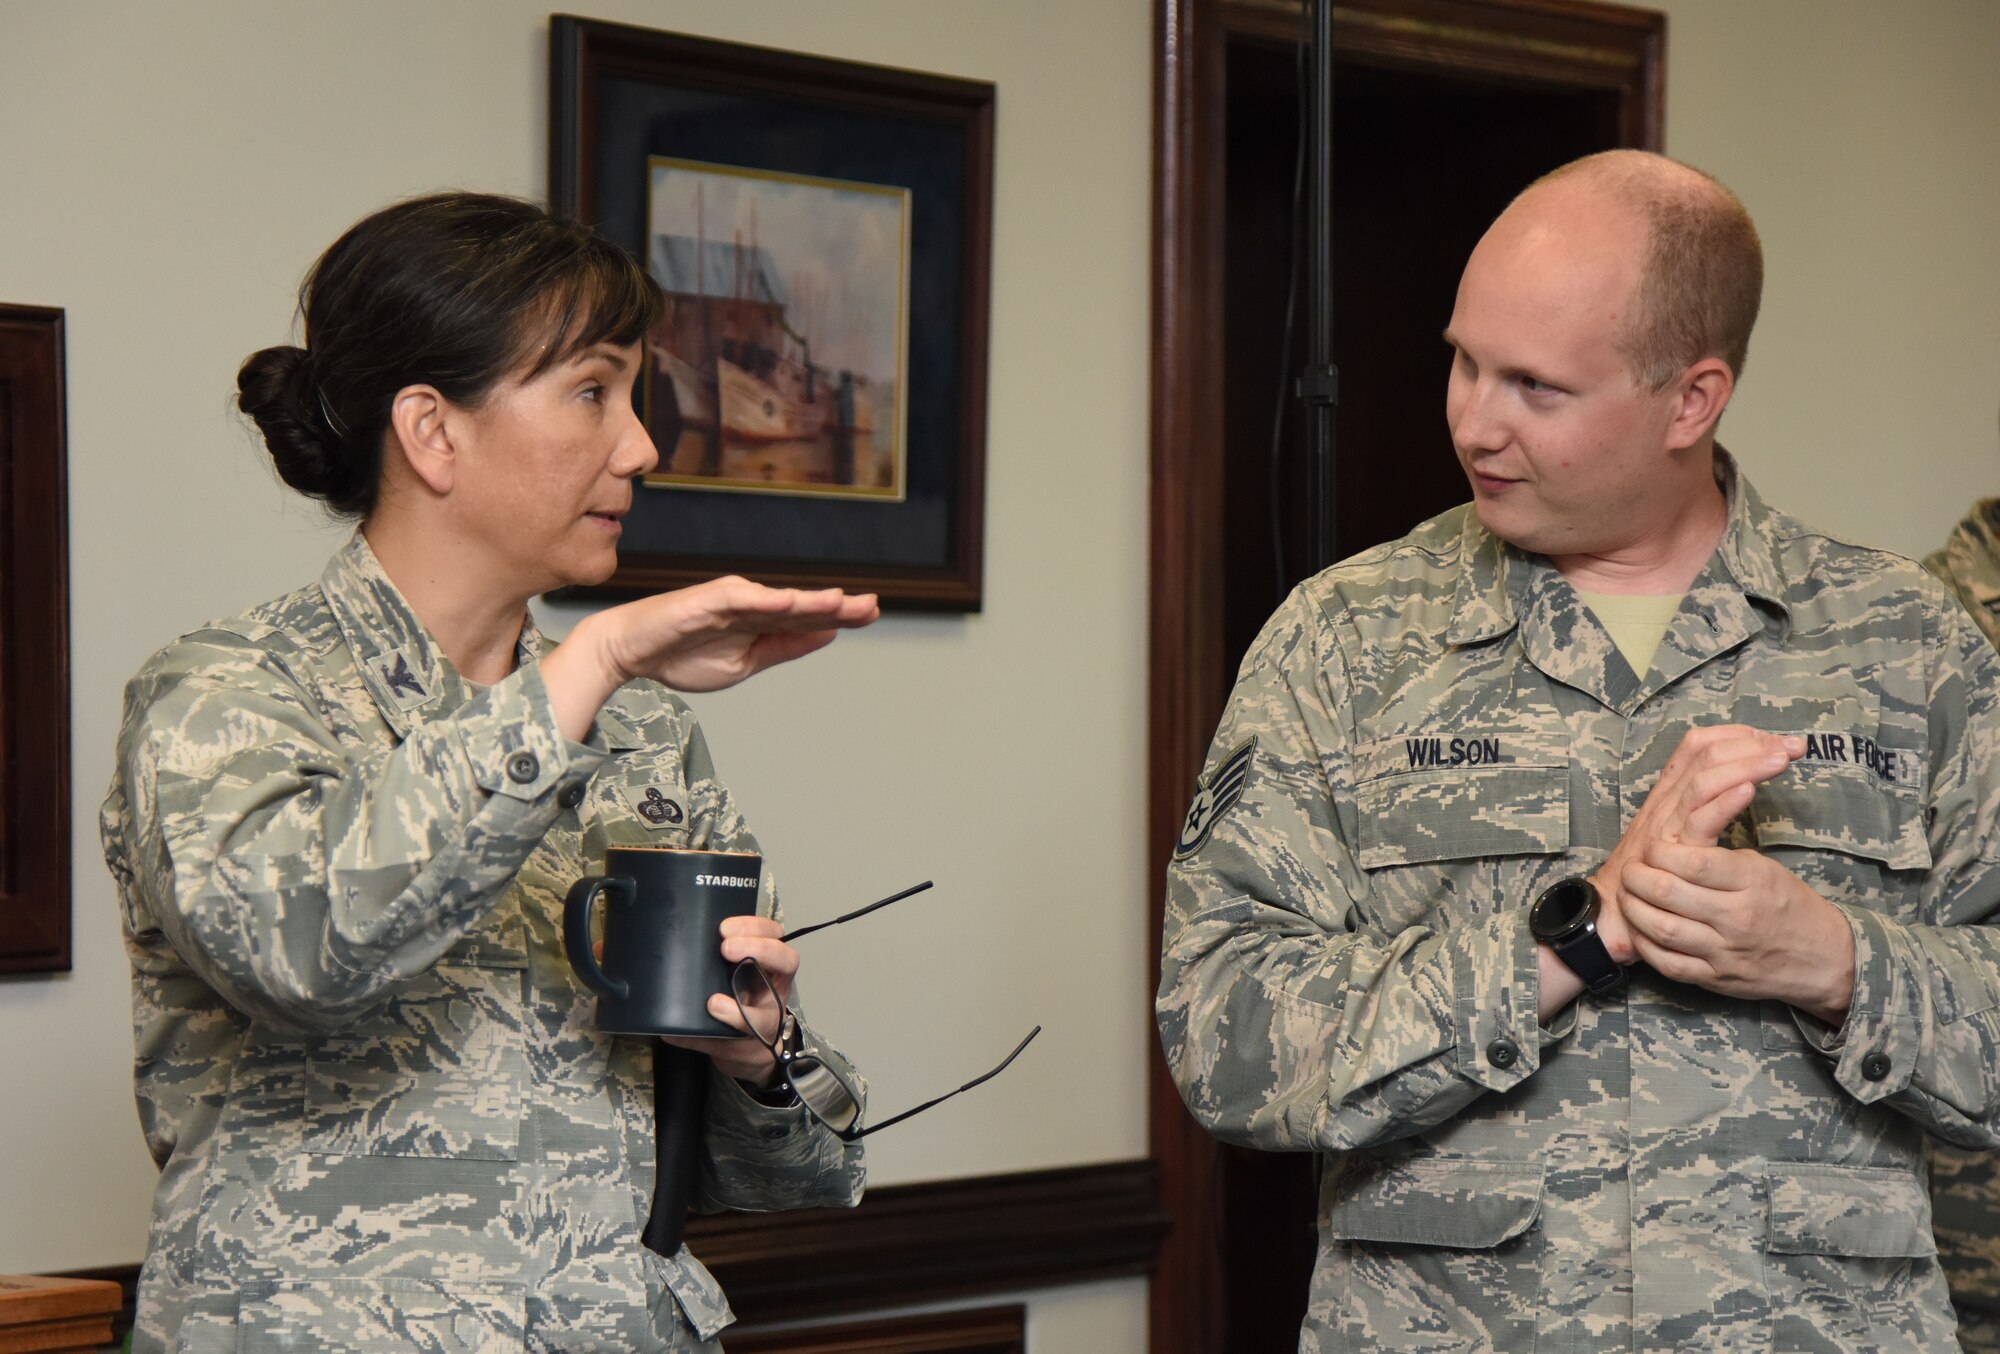 U.S. Air Force Col. Debra Lovette, 81st Training Wing commander, discusses the benefits of using virtual reality for training purposes with Staff Sgt. Chris Wilson, 81st Training Support Squadron instructional developer, in the 81st TRW headquarters building at Keesler Air Force Base, Mississippi, May 4, 2018. The 81st Training Group has implemented augmented and virtual reality into training, such as airfield, weather and air traffic control training. (U.S. Air Force photo by Kemberly Groue)